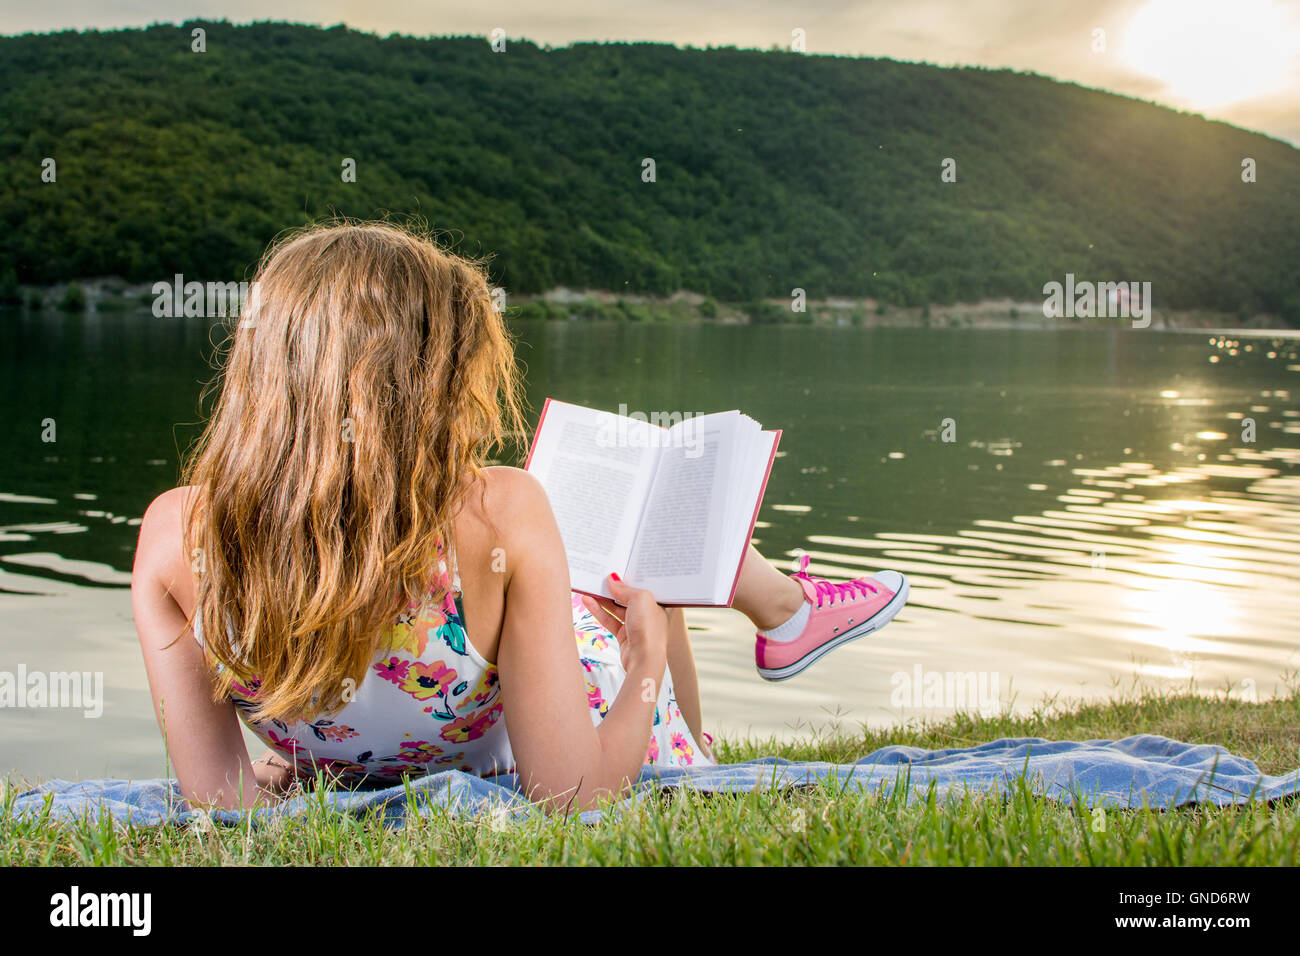 Girl reading a book by the lake. Summertime leisure Stock Photo